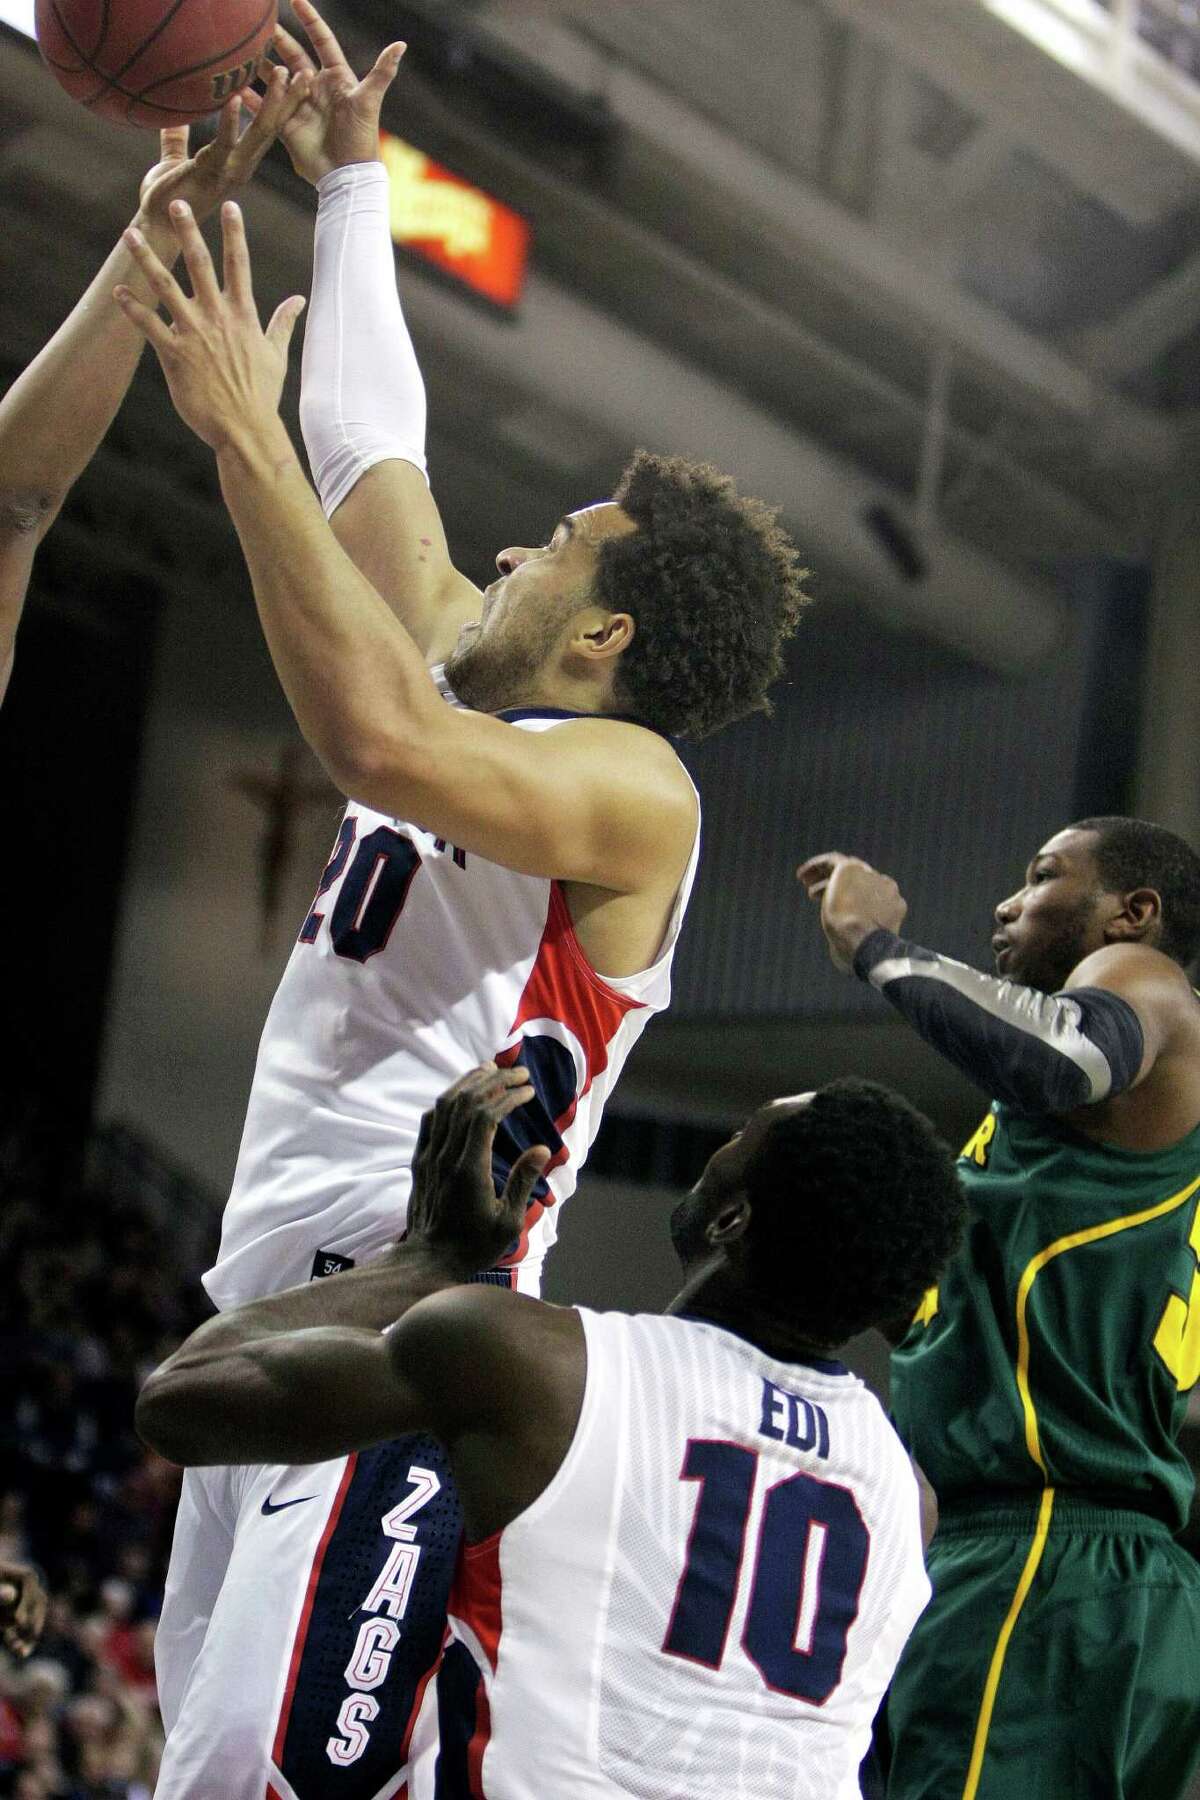 Gonzaga's Elias Harris, left, goes after a rebound during the first half of an NCAA college basketball game against Baylor in Spokane, Wash., on Friday, Dec. 28, 2012. (AP Photo/Young Kwak)